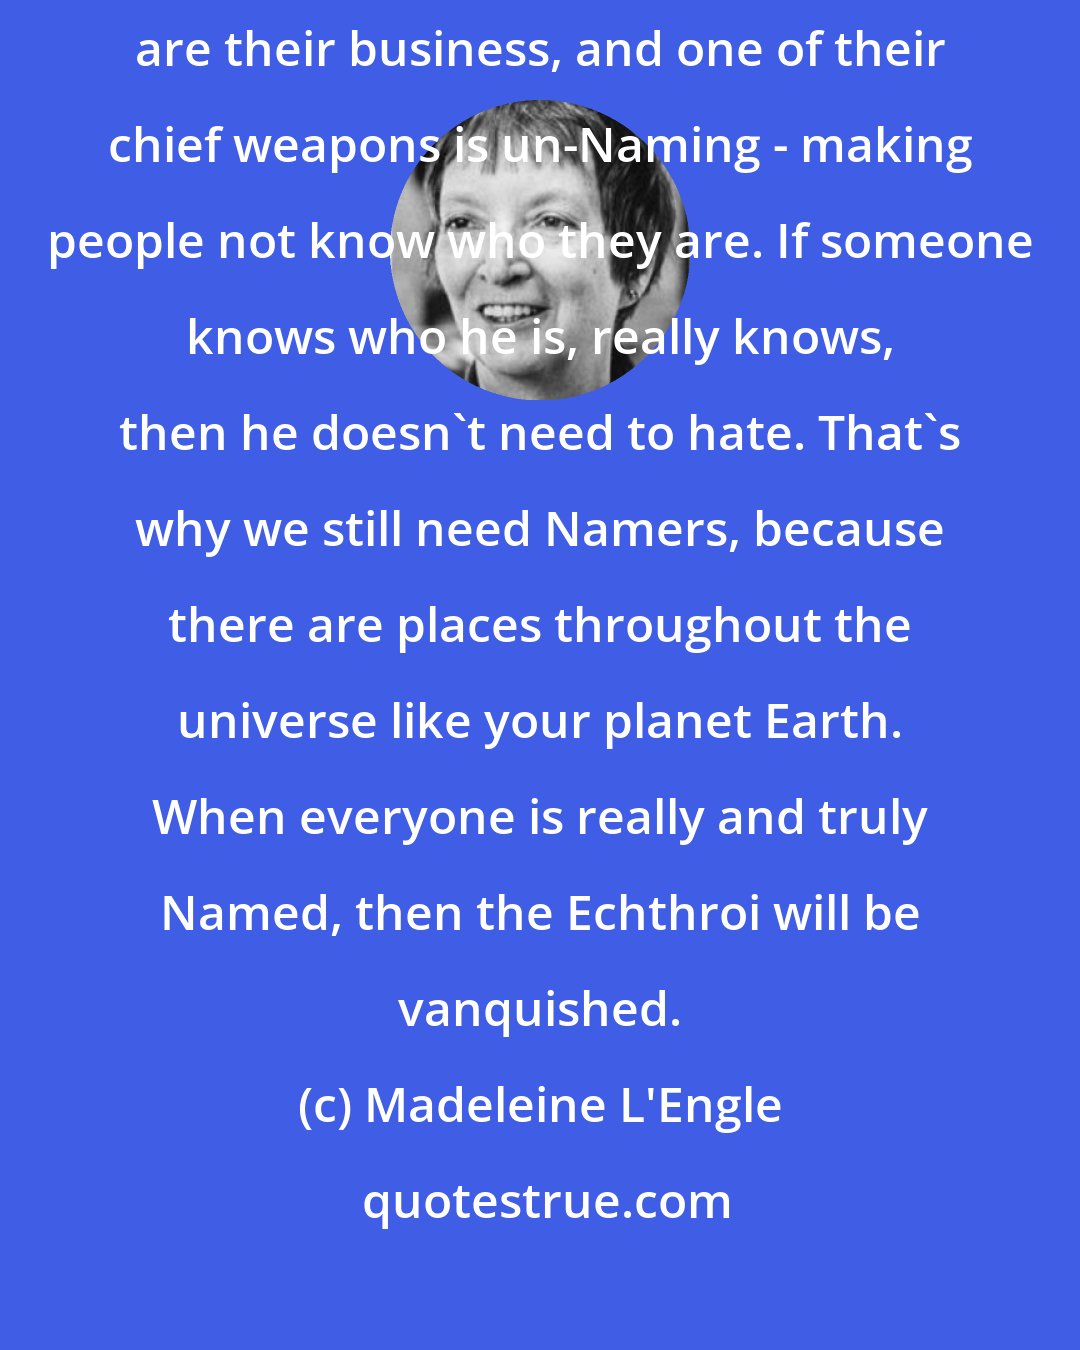 Madeleine L'Engle: I think your mythology would call them fallen angels. War and hate are their business, and one of their chief weapons is un-Naming - making people not know who they are. If someone knows who he is, really knows, then he doesn't need to hate. That's why we still need Namers, because there are places throughout the universe like your planet Earth. When everyone is really and truly Named, then the Echthroi will be vanquished.